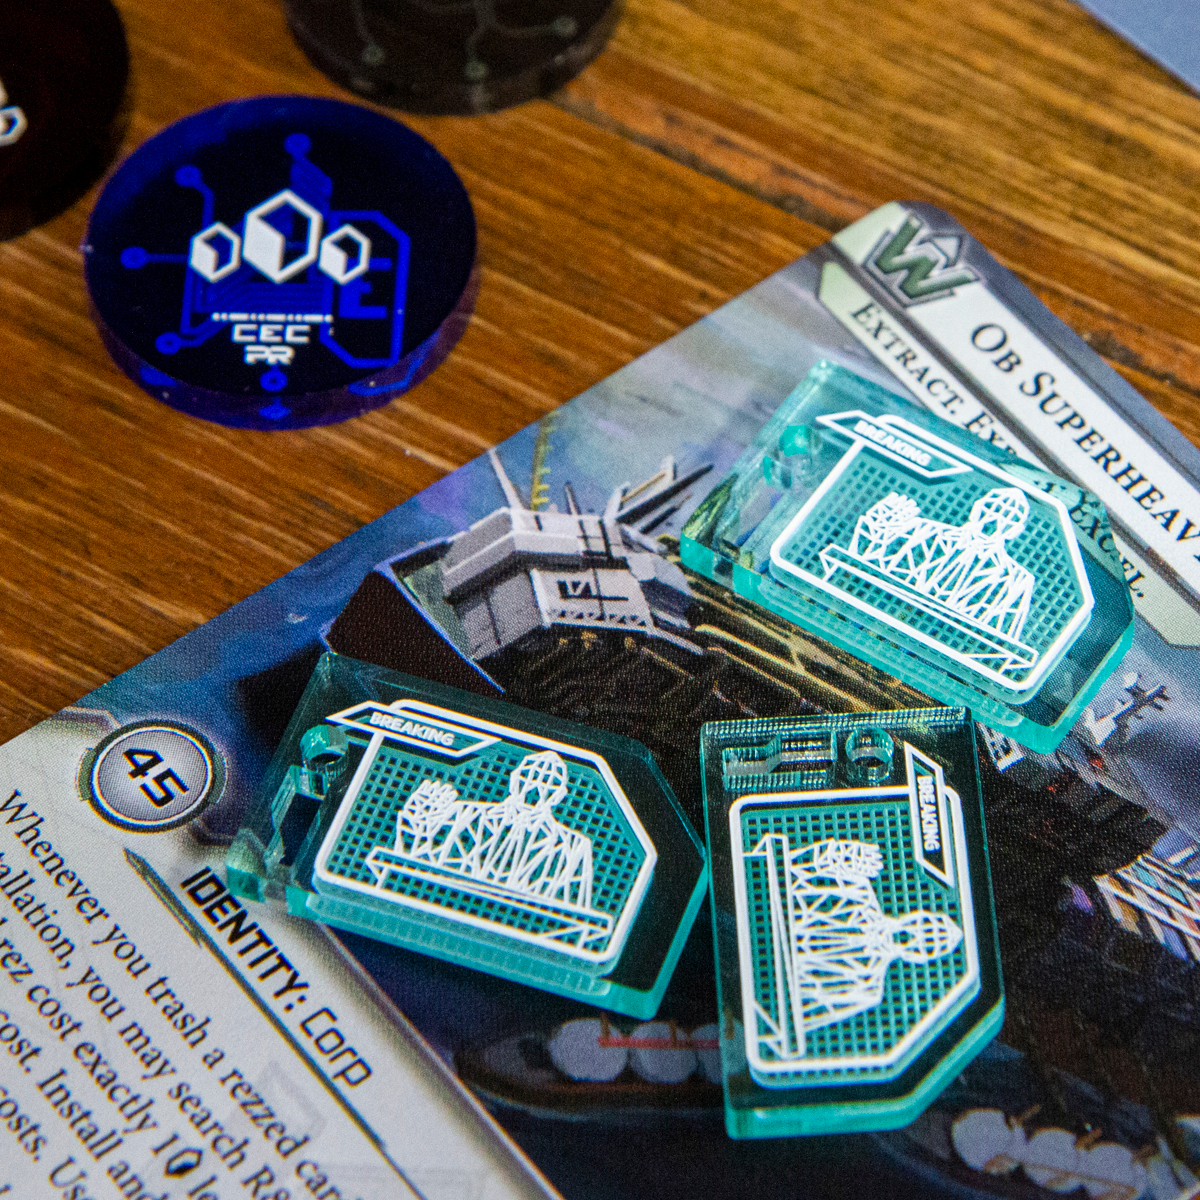 Three Bad Publicity tokens on top of the Netrunner identity Ob Superheavy Logistics, above the card there is a 3-value credit token